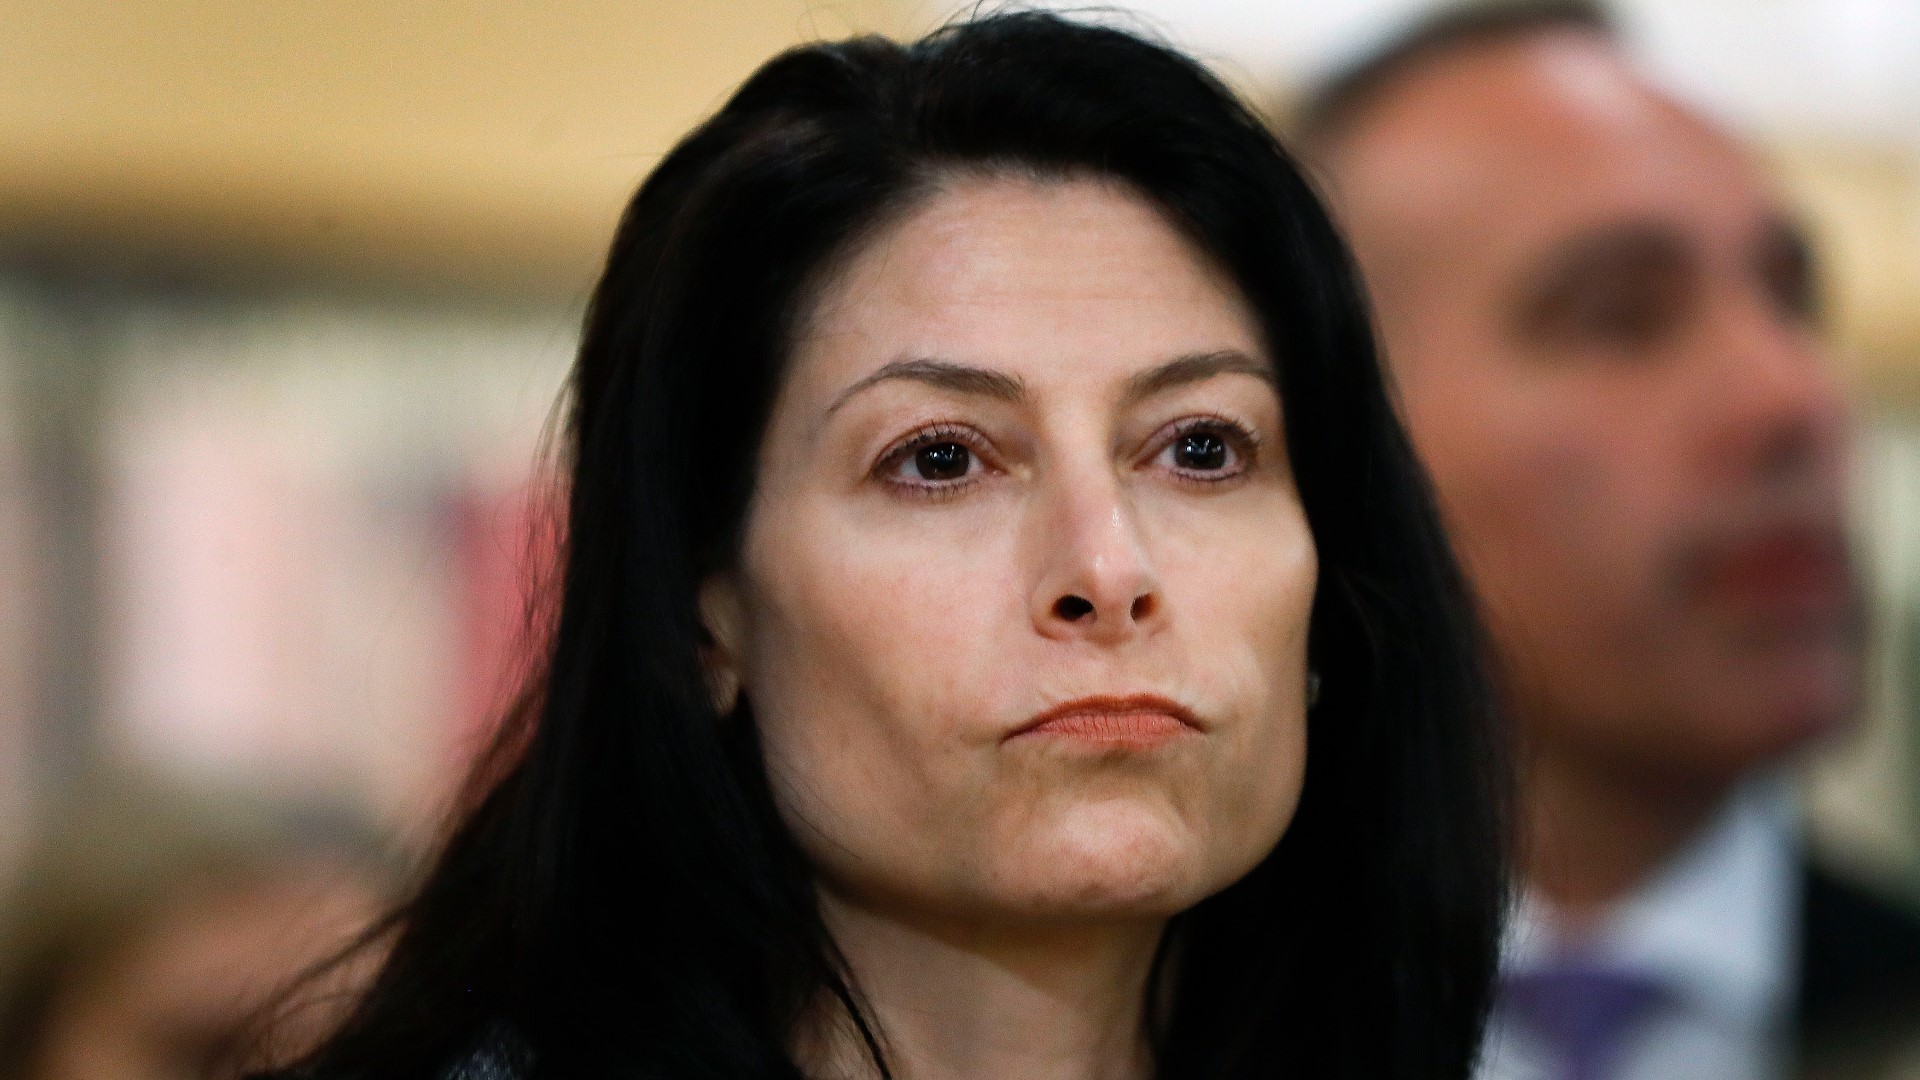 Michigan Attorney General Dana Nessel filed charges for three individuals in three separate elder abuse cases in Kent County Friday. The move kicked off the first Elder Abuse Task Force listening tour stop in Grand Rapids.